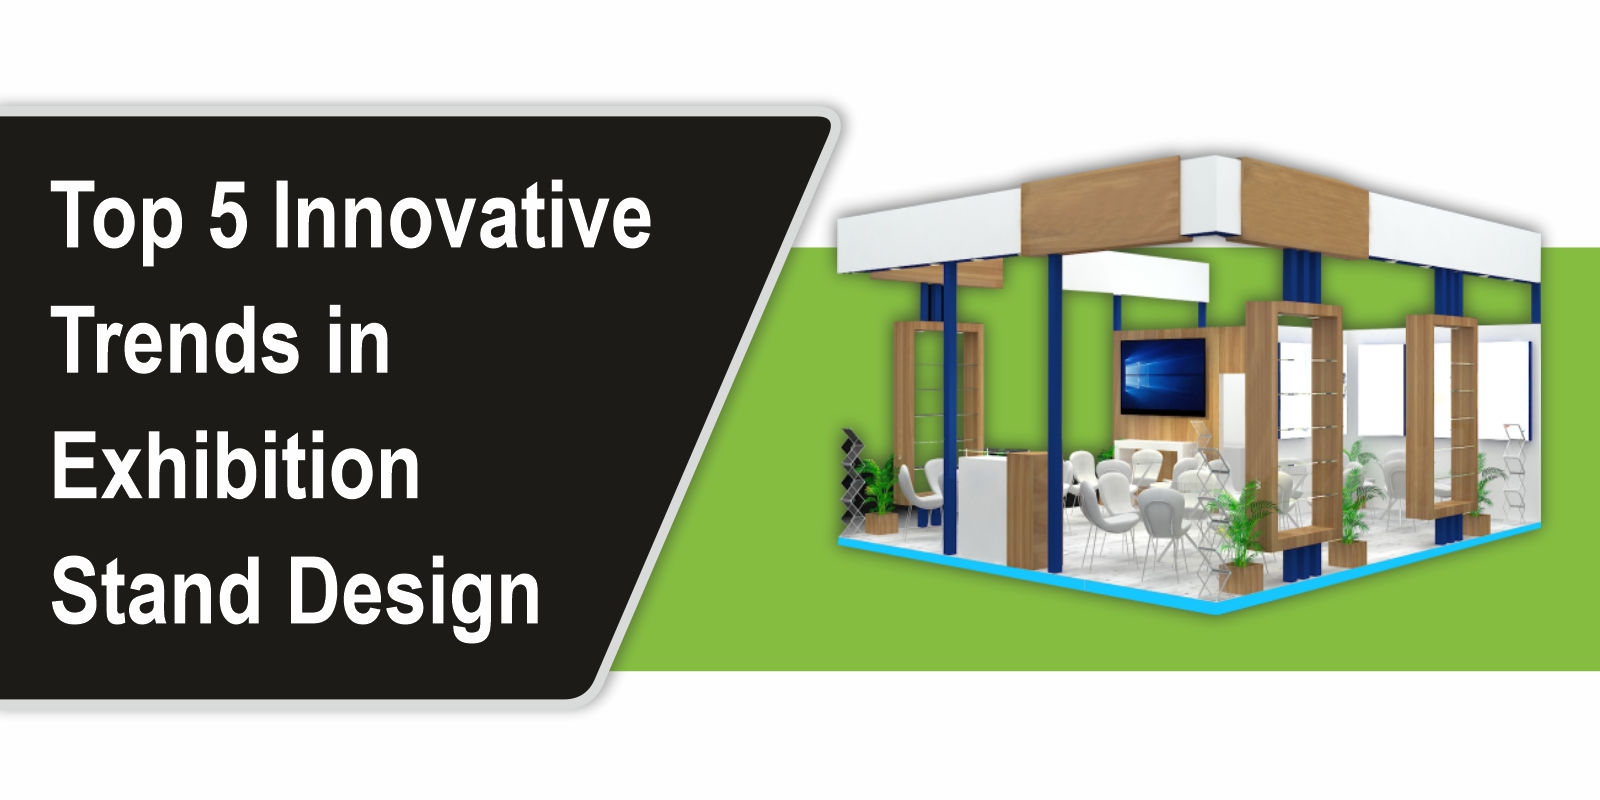 Top 5 Innovative Trends in Exhibition Stand Design